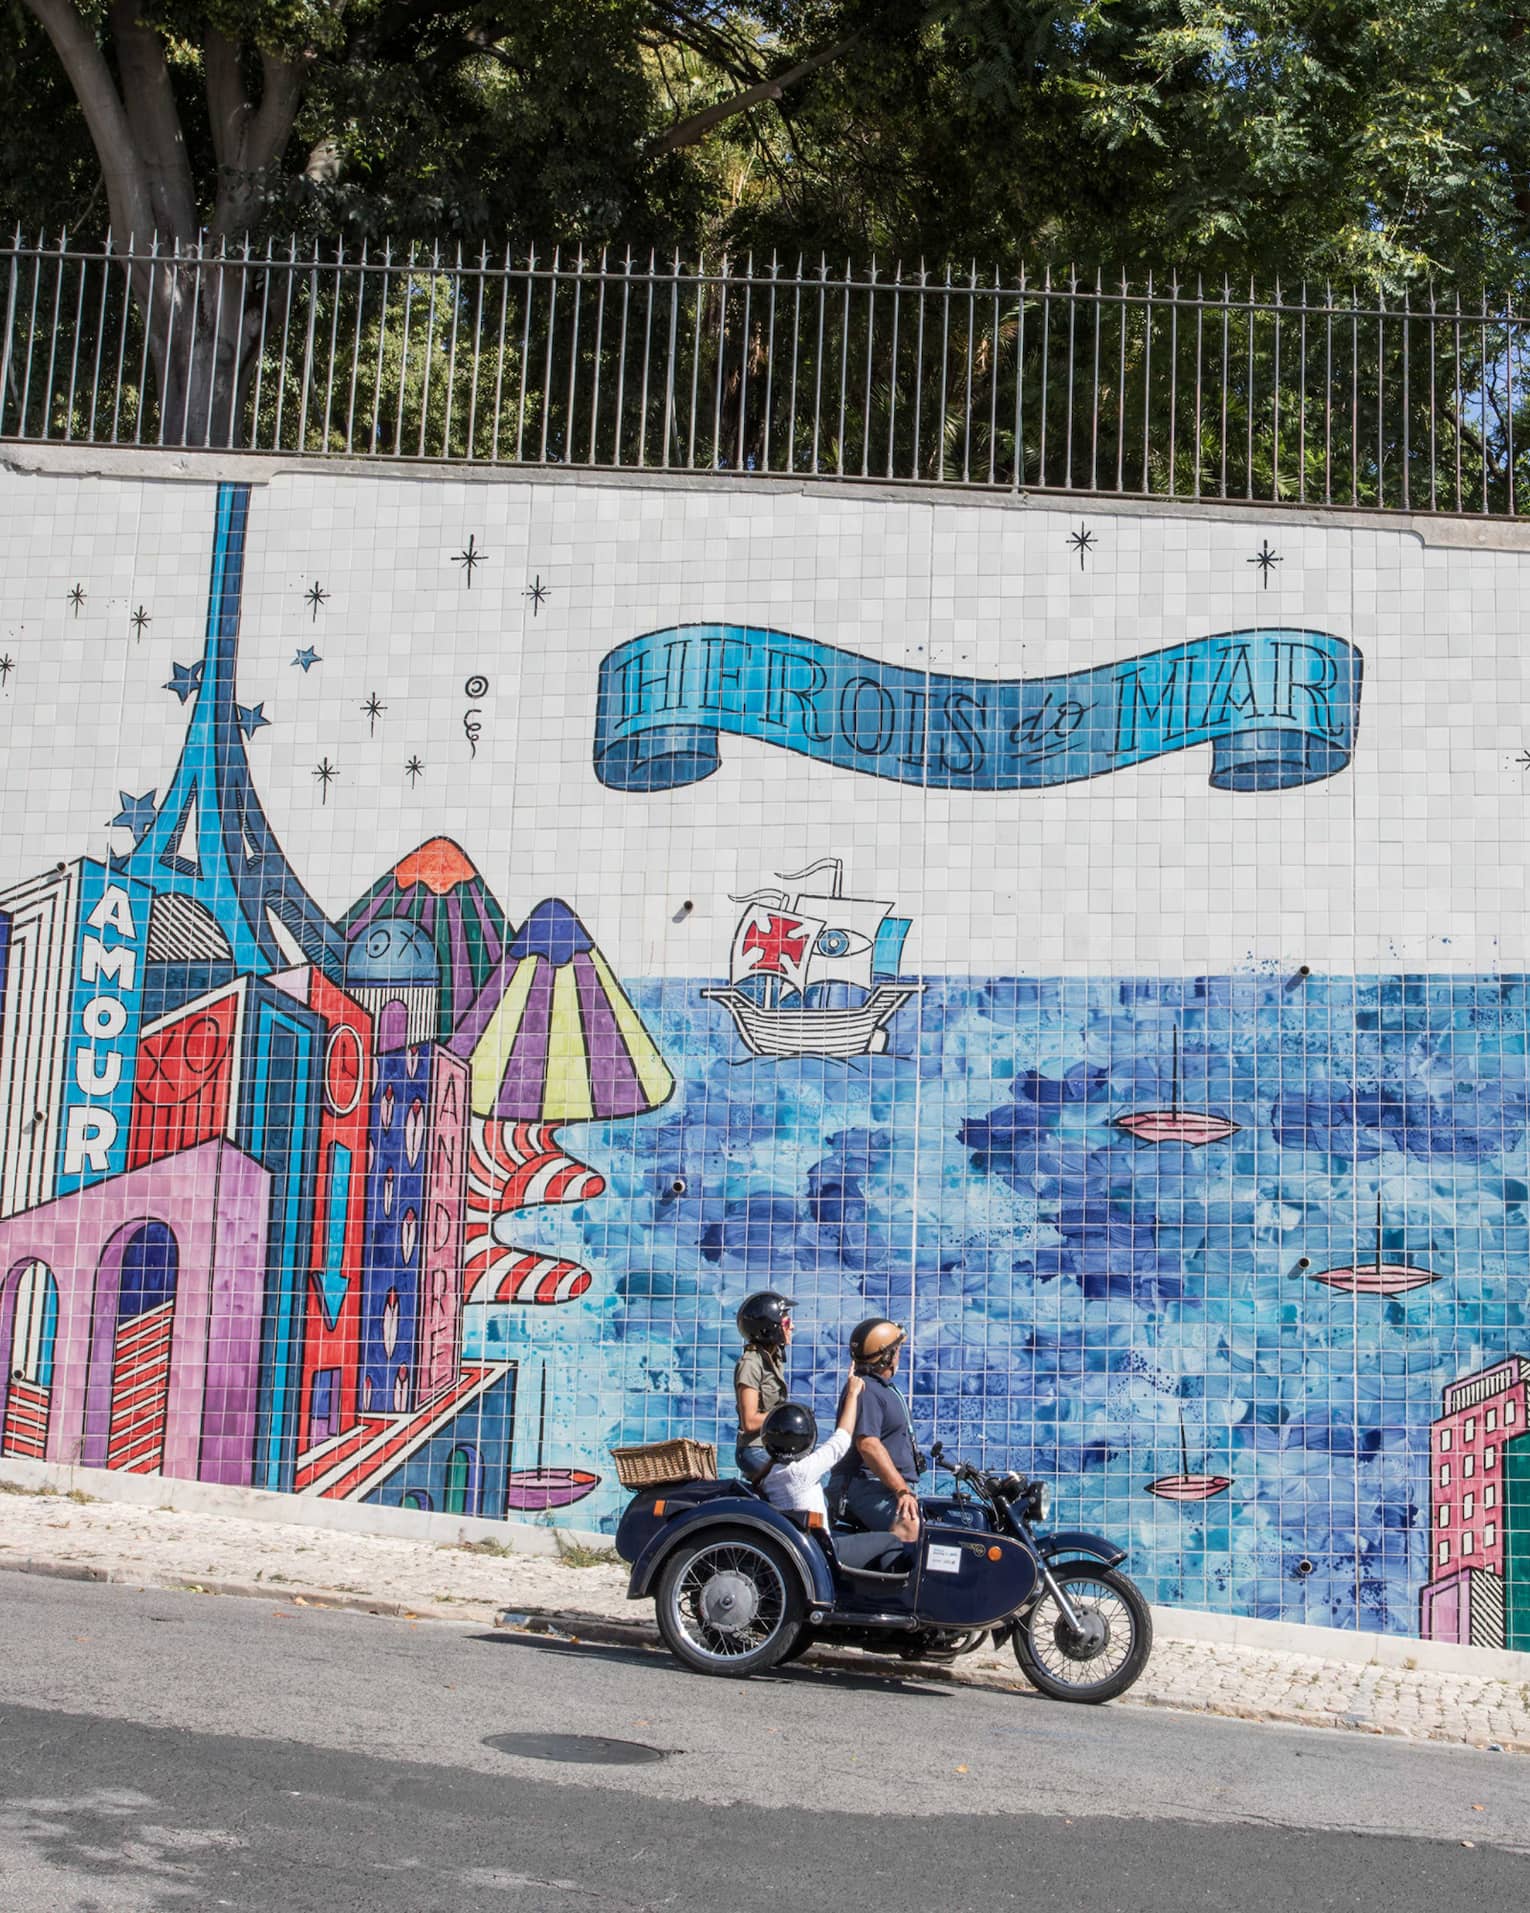 Two adults and a child stop their motorcycle to look at a city mural made of tiles